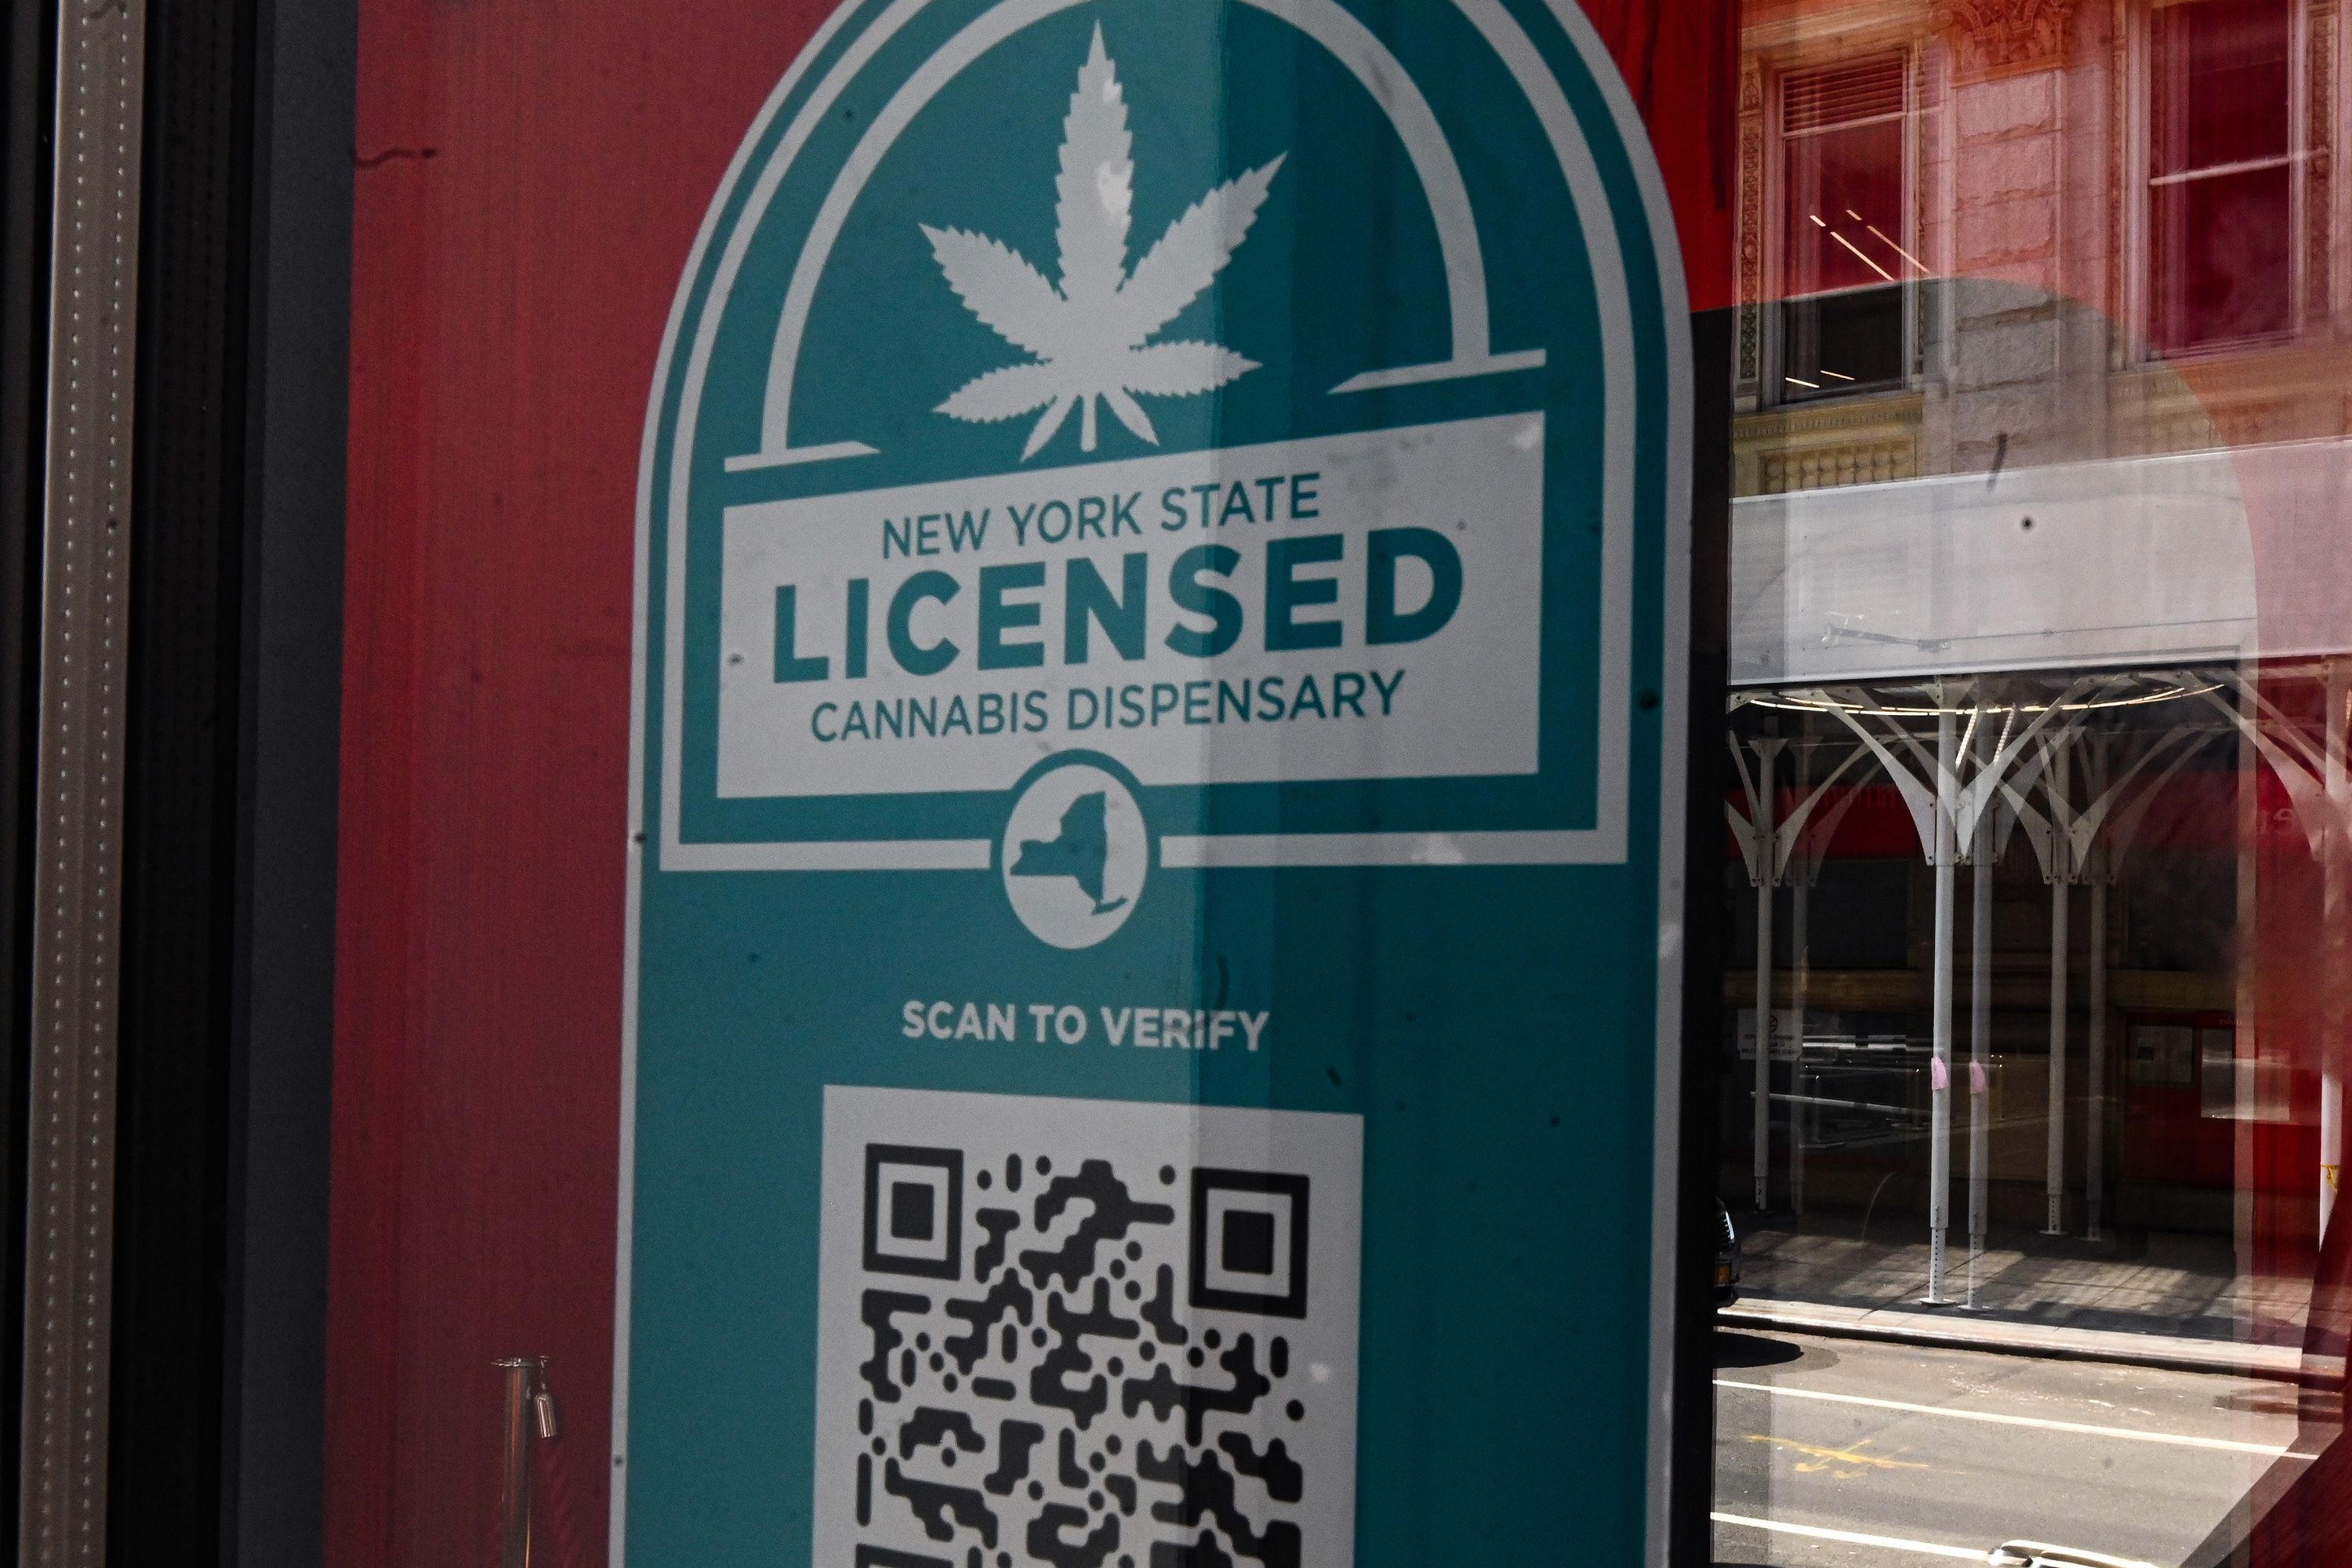 Dazed at Union Square had its Dispensary Verification Tool displayed even before opening to customers